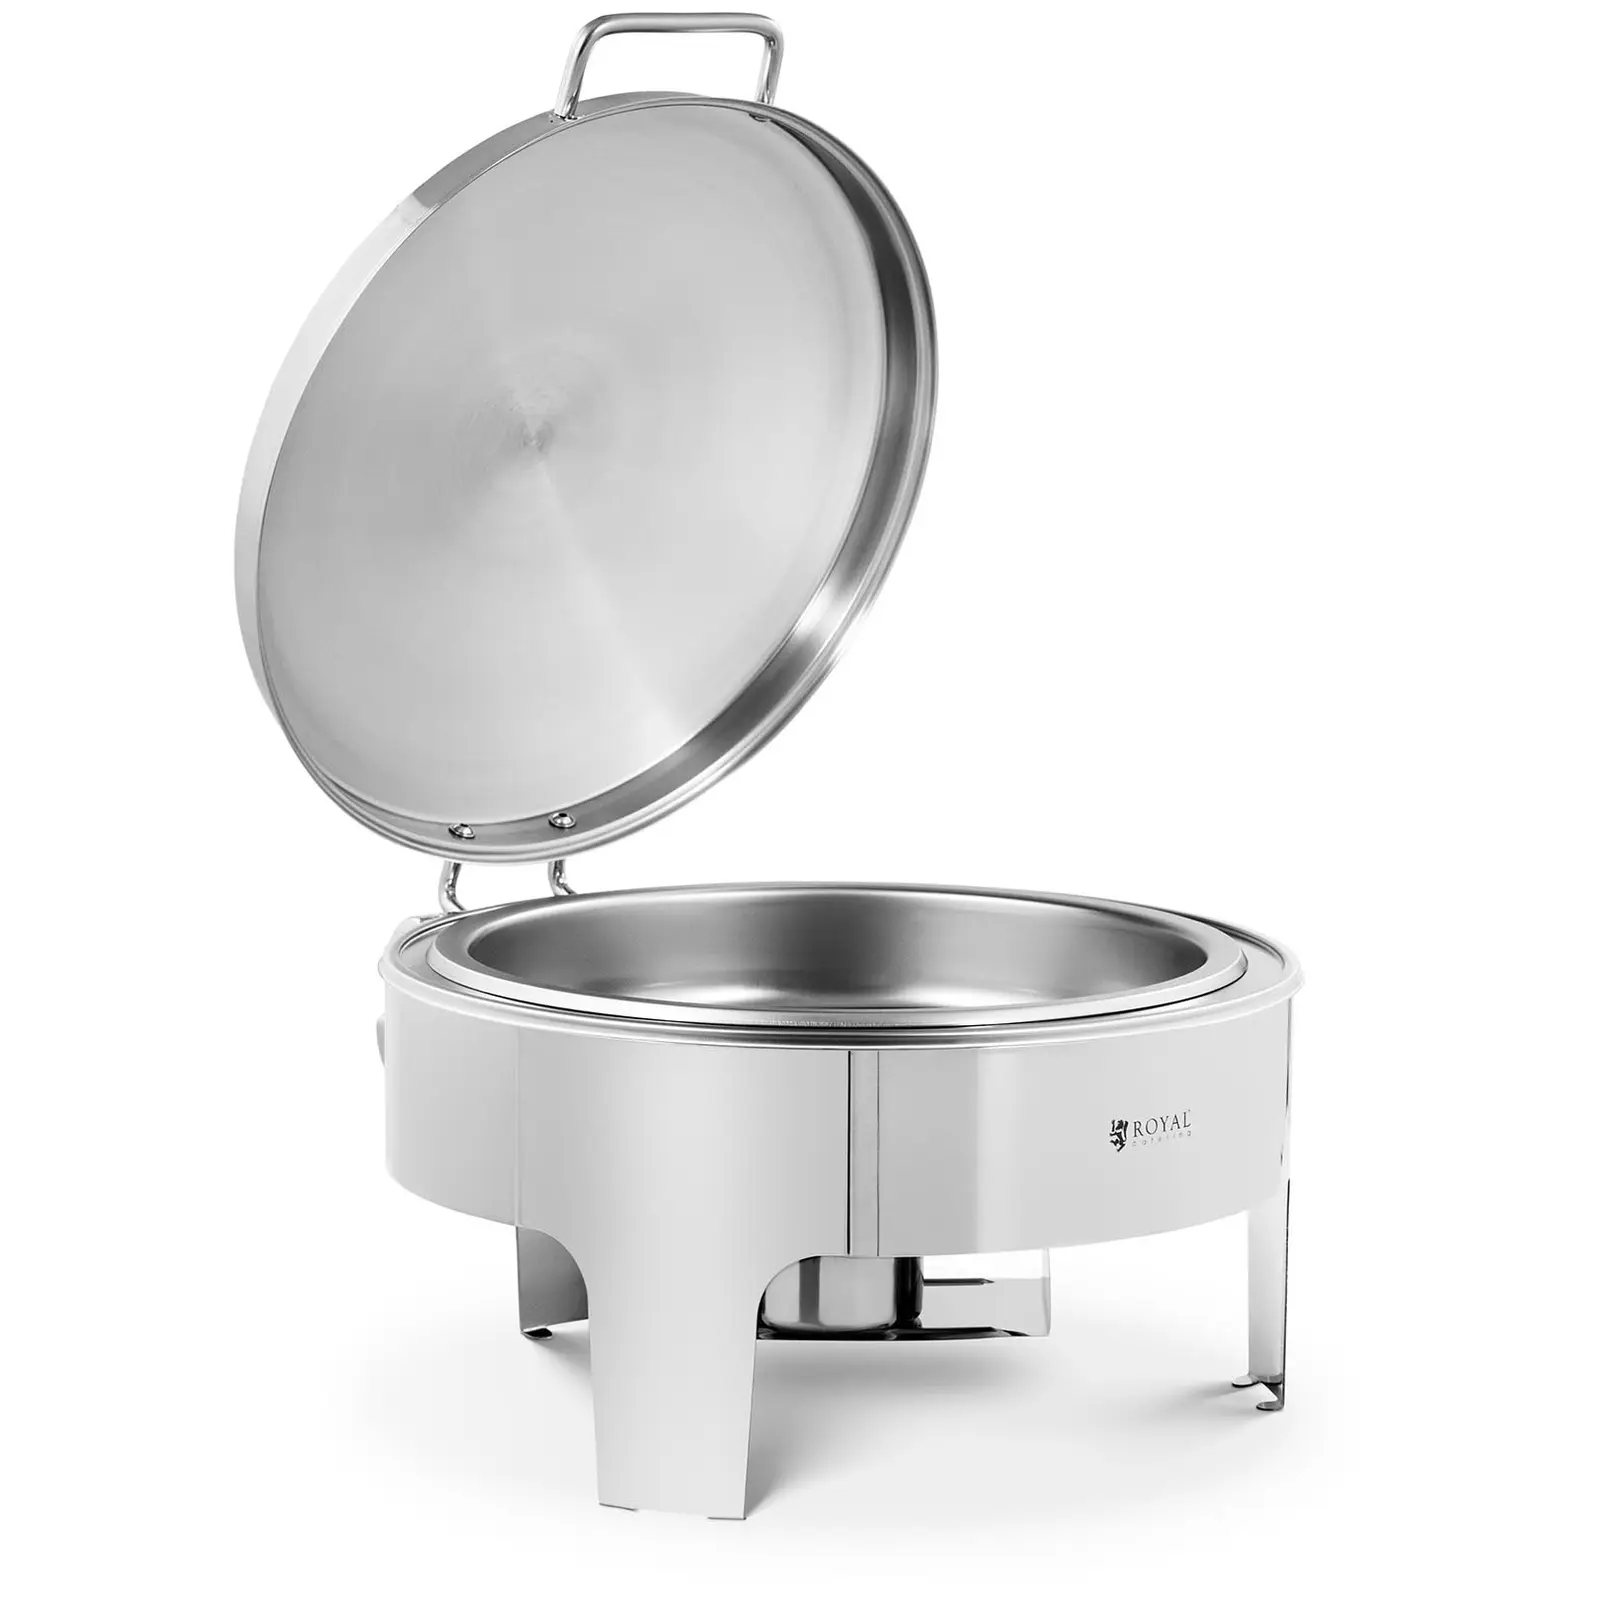 Chafing Dish - redondo - Royal Catering - 5,8 L - 1 contenedor de combustible